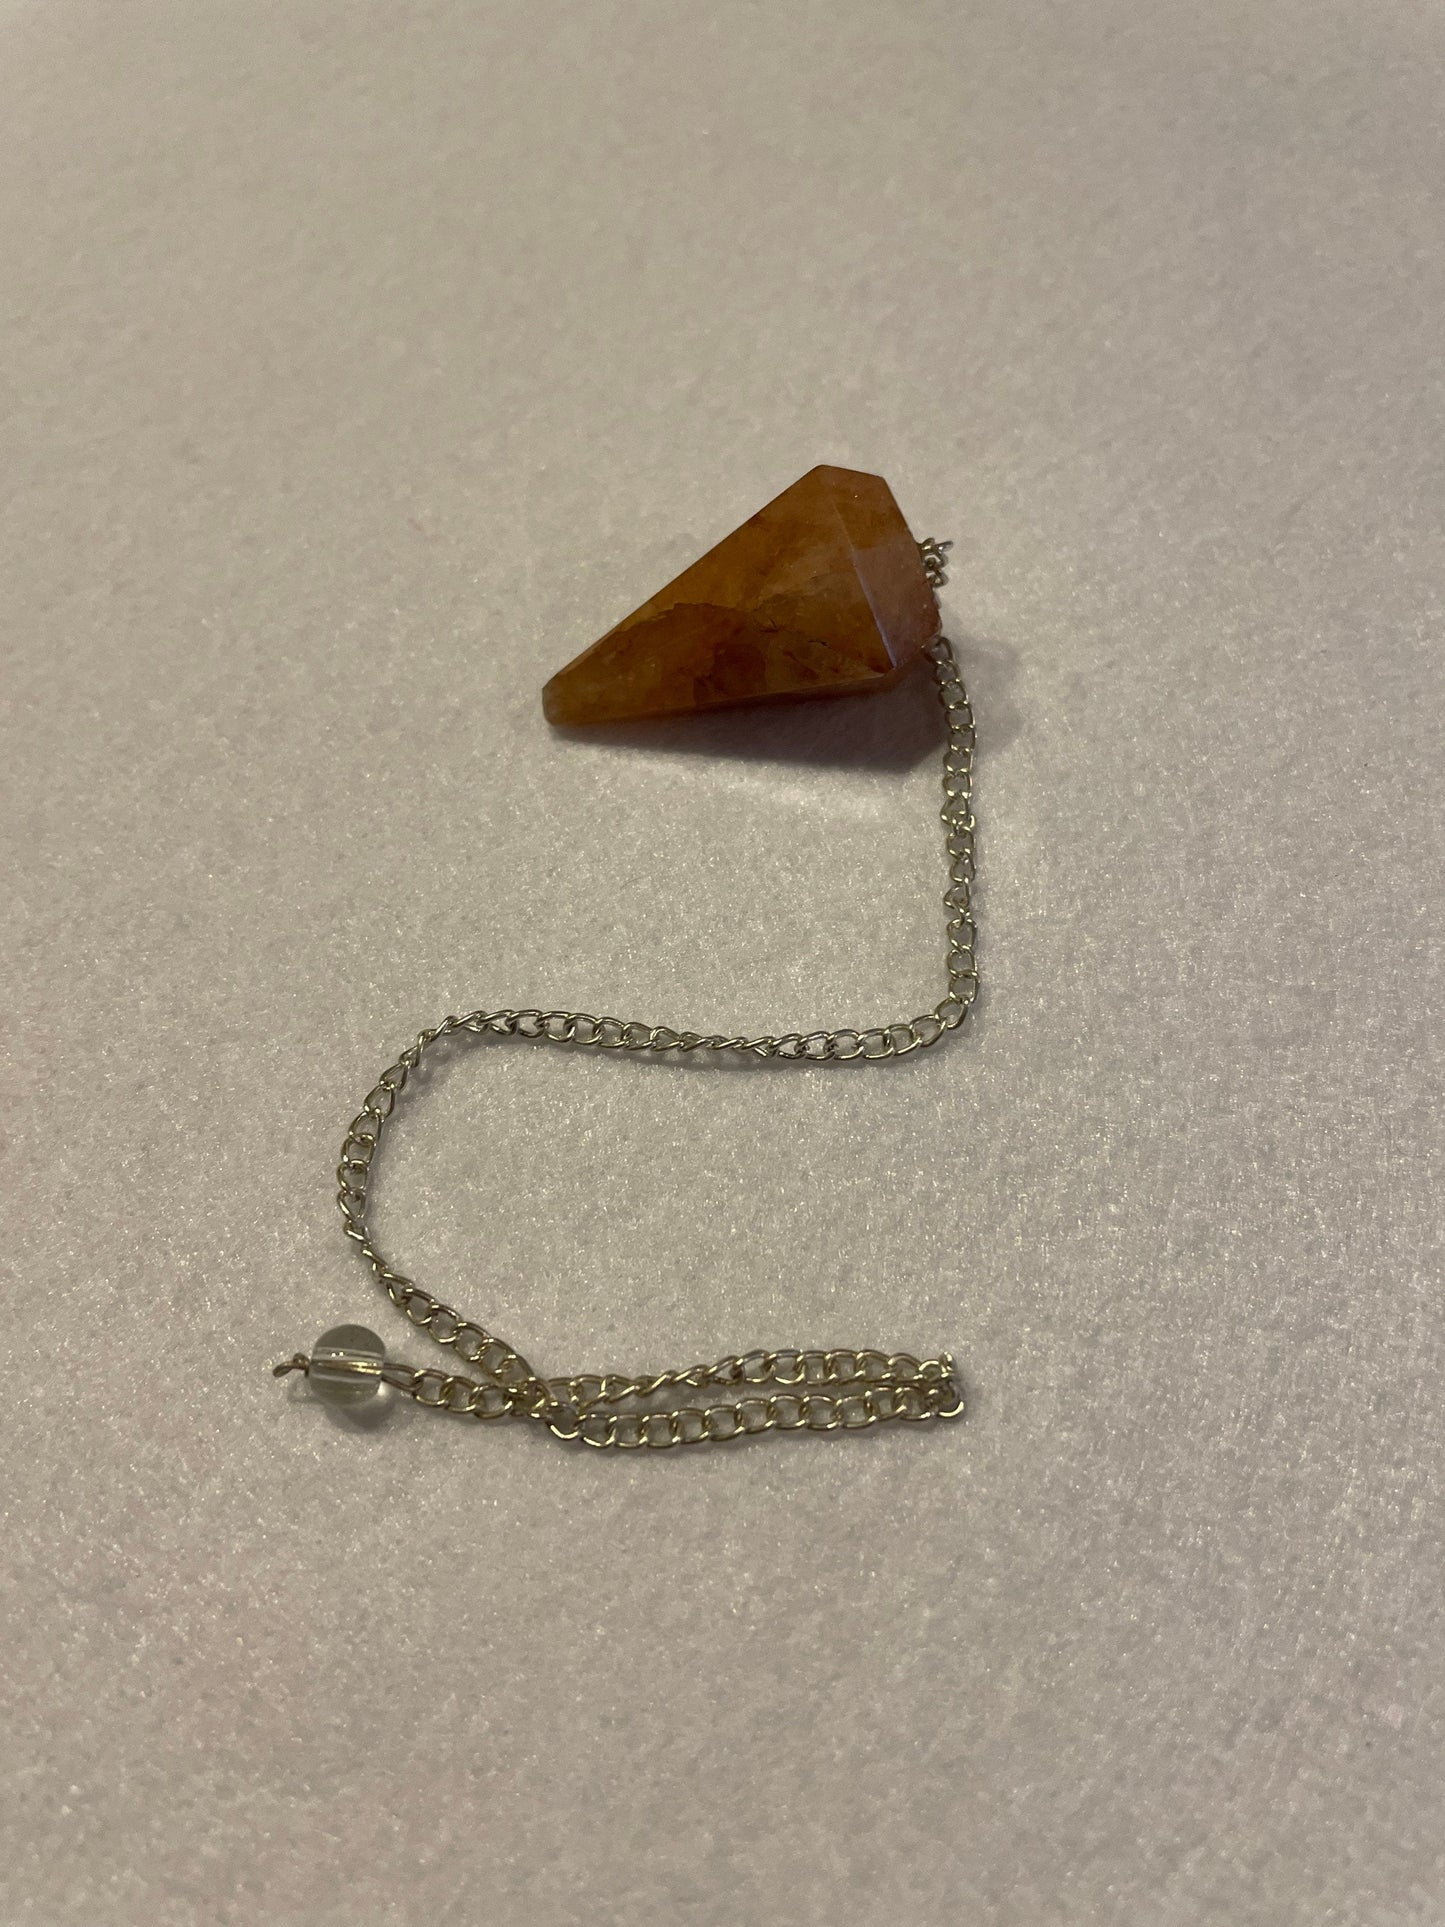 Beautiful Carnelian Pendulum is 1.25” and with the chain it is approximately 9.5”